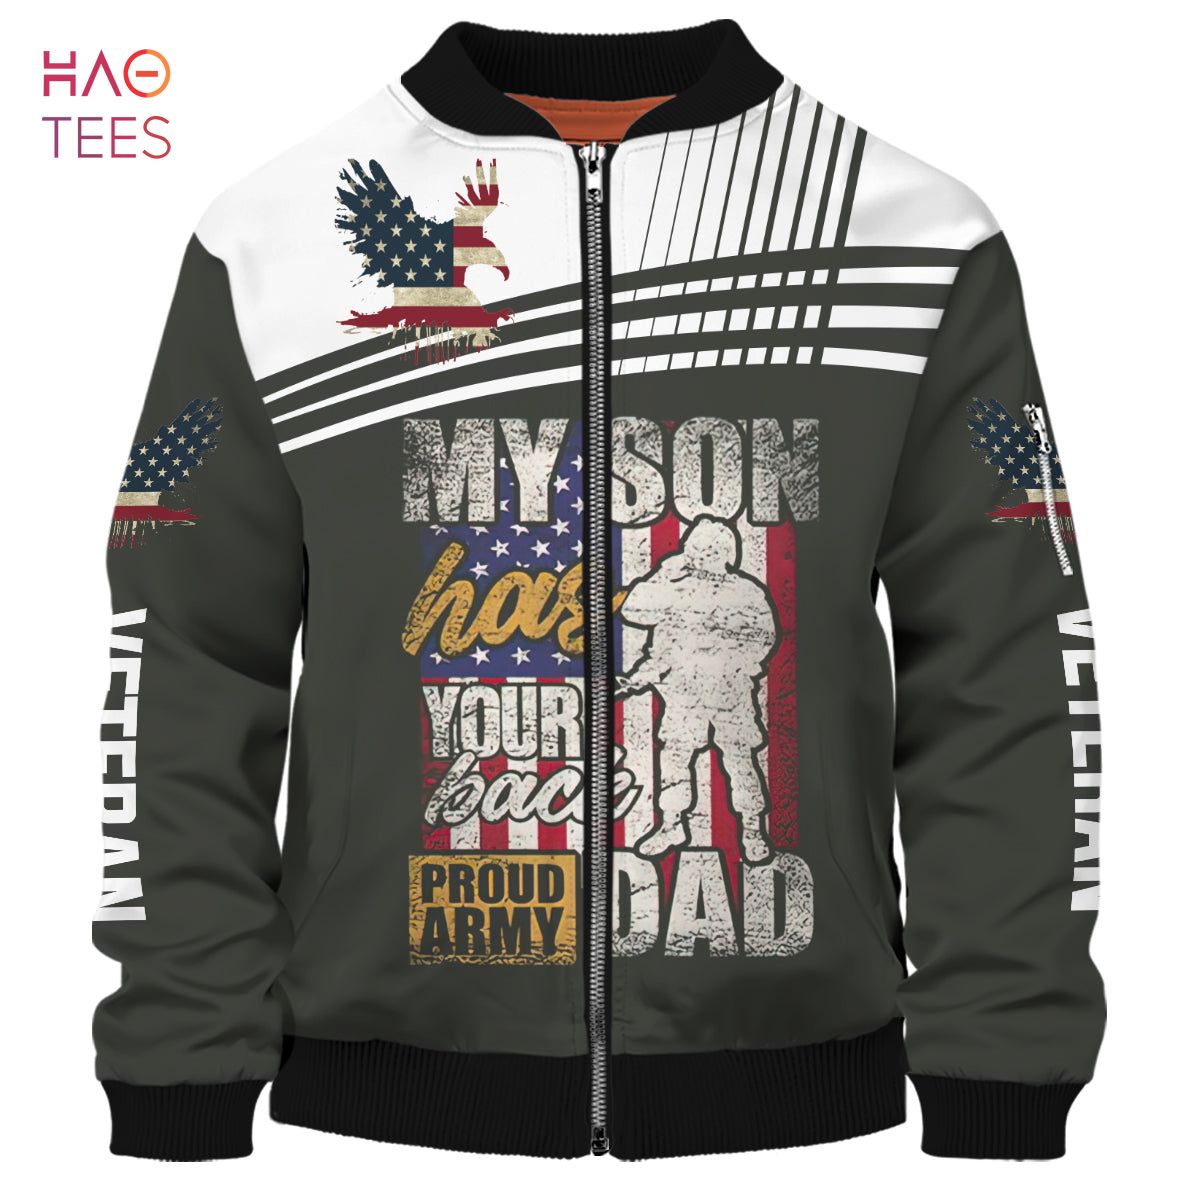 NEW My Son Has Your Back Proud Army Dad 3D Bomber